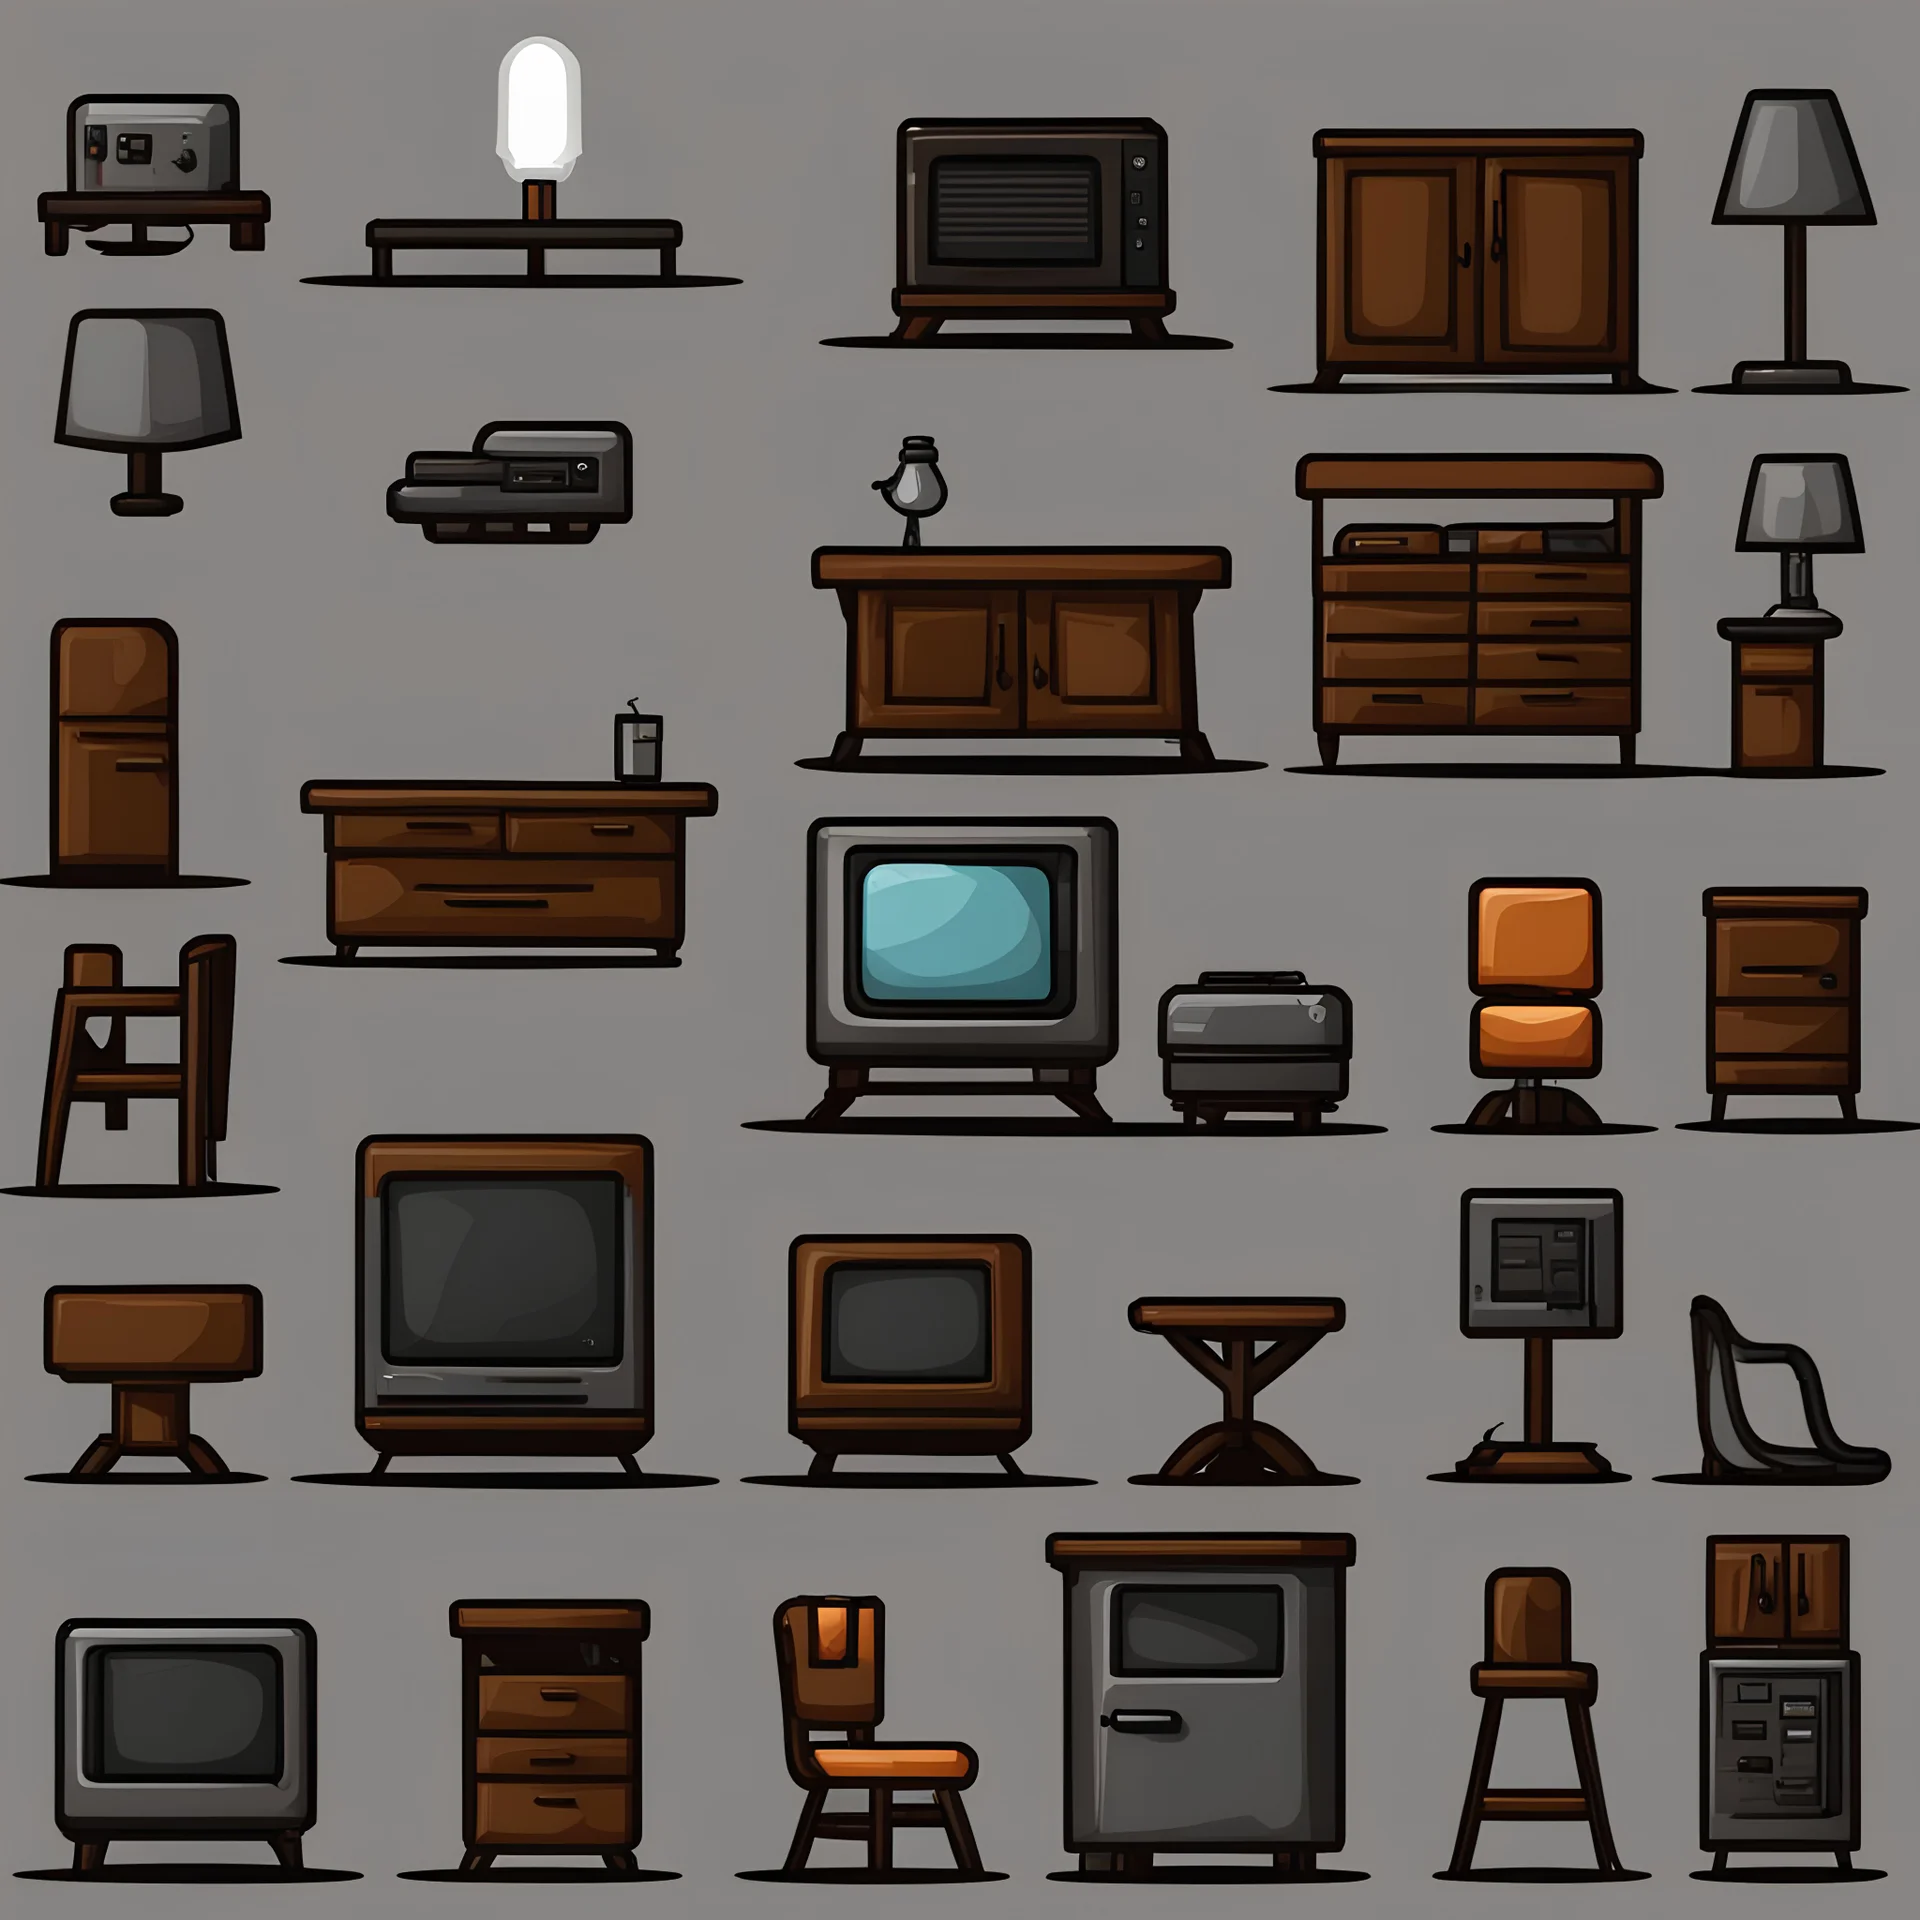 Sprite sheet, furniture, table, chair, television, lamp, toaster, icons, survival game, gray background, ,